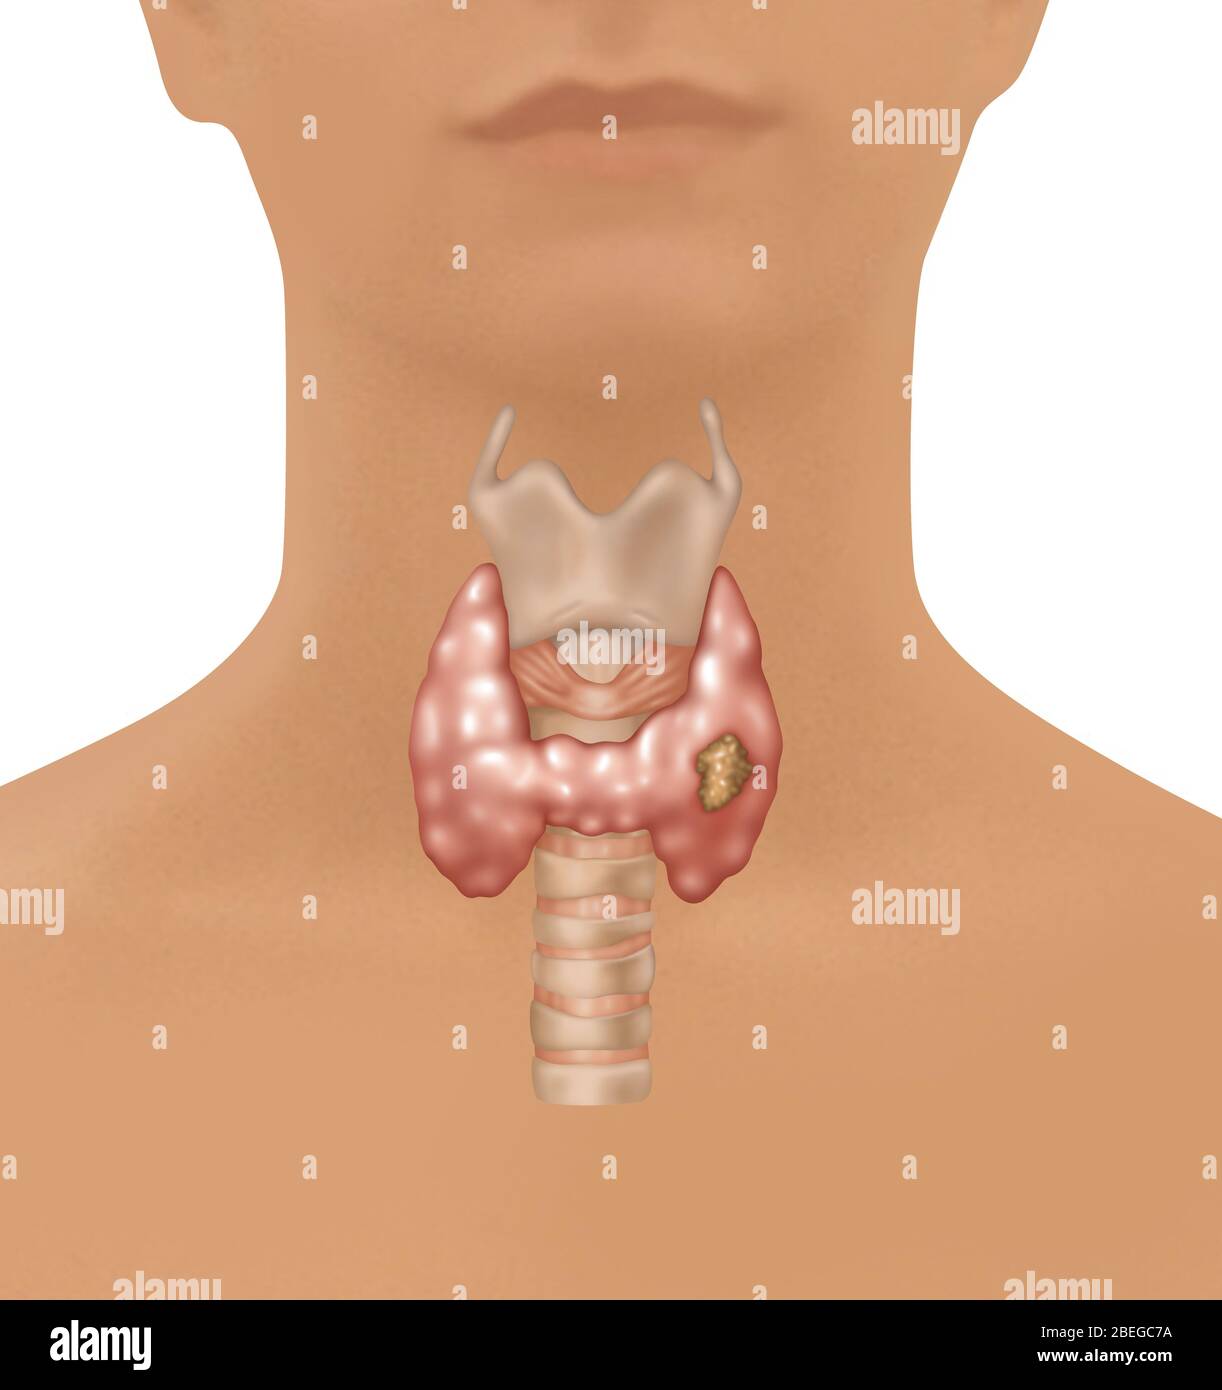 Illustration showing the location of the larynx, thyroid gland, and trachea in a female figure. A malignant growth can be seen in the lower right area of the thyroid. Stock Photo